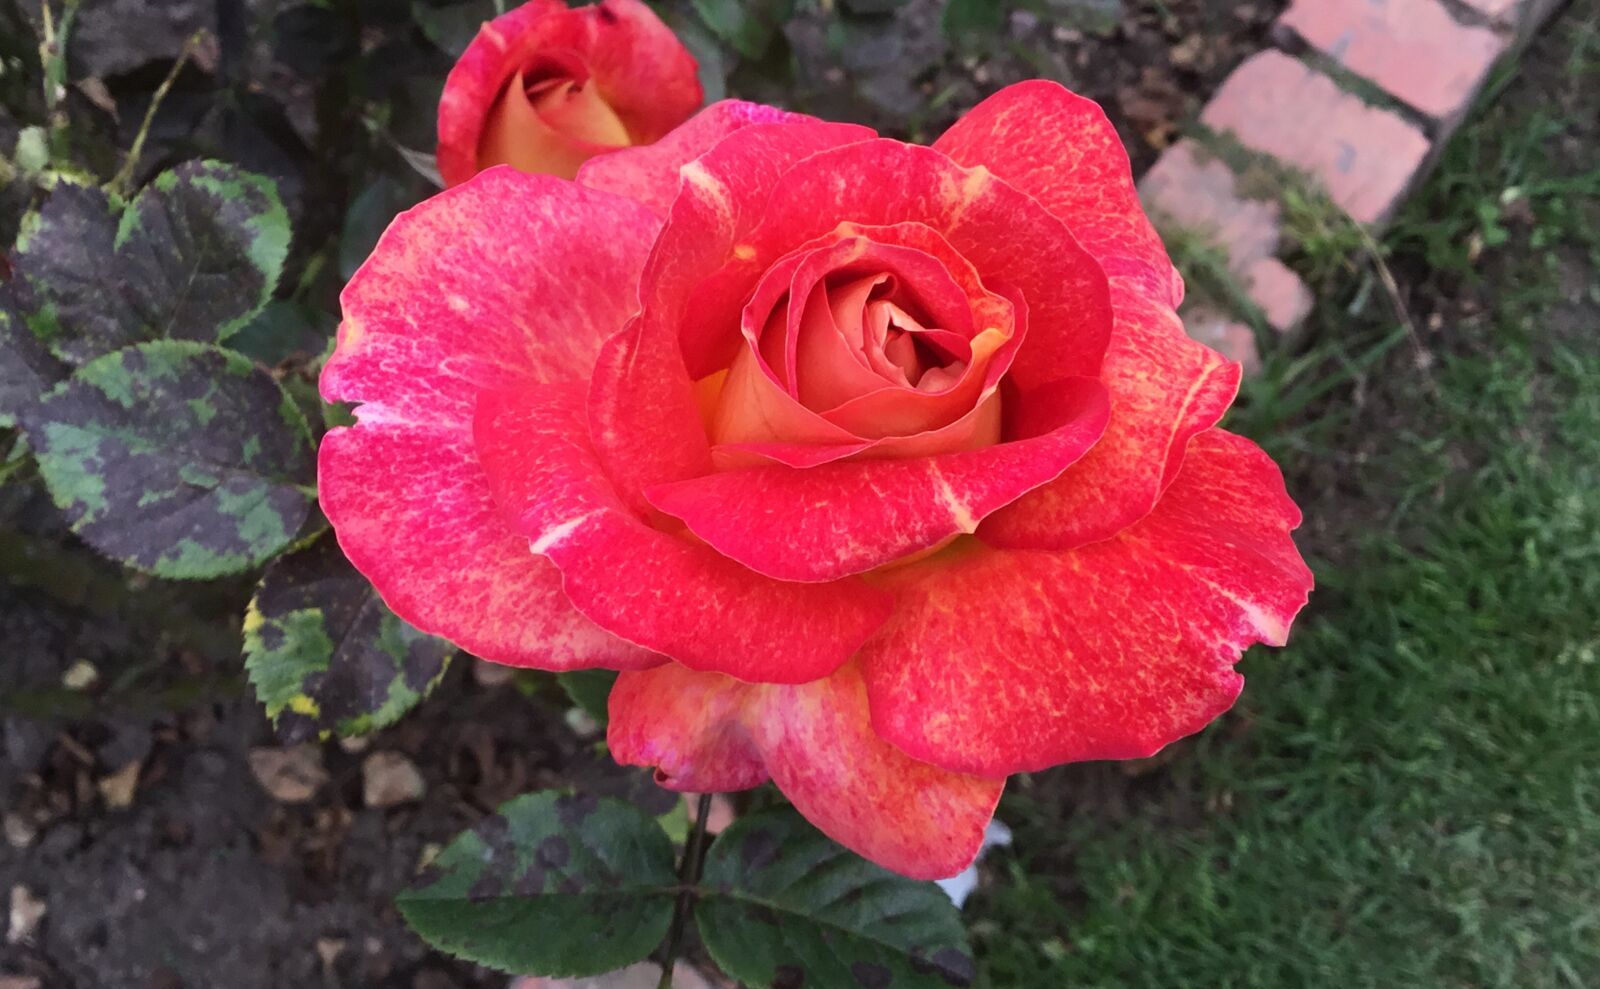 iPad Pro back camera 3.3mm f/2.4 sample photo. Flower, red roses, petals photography